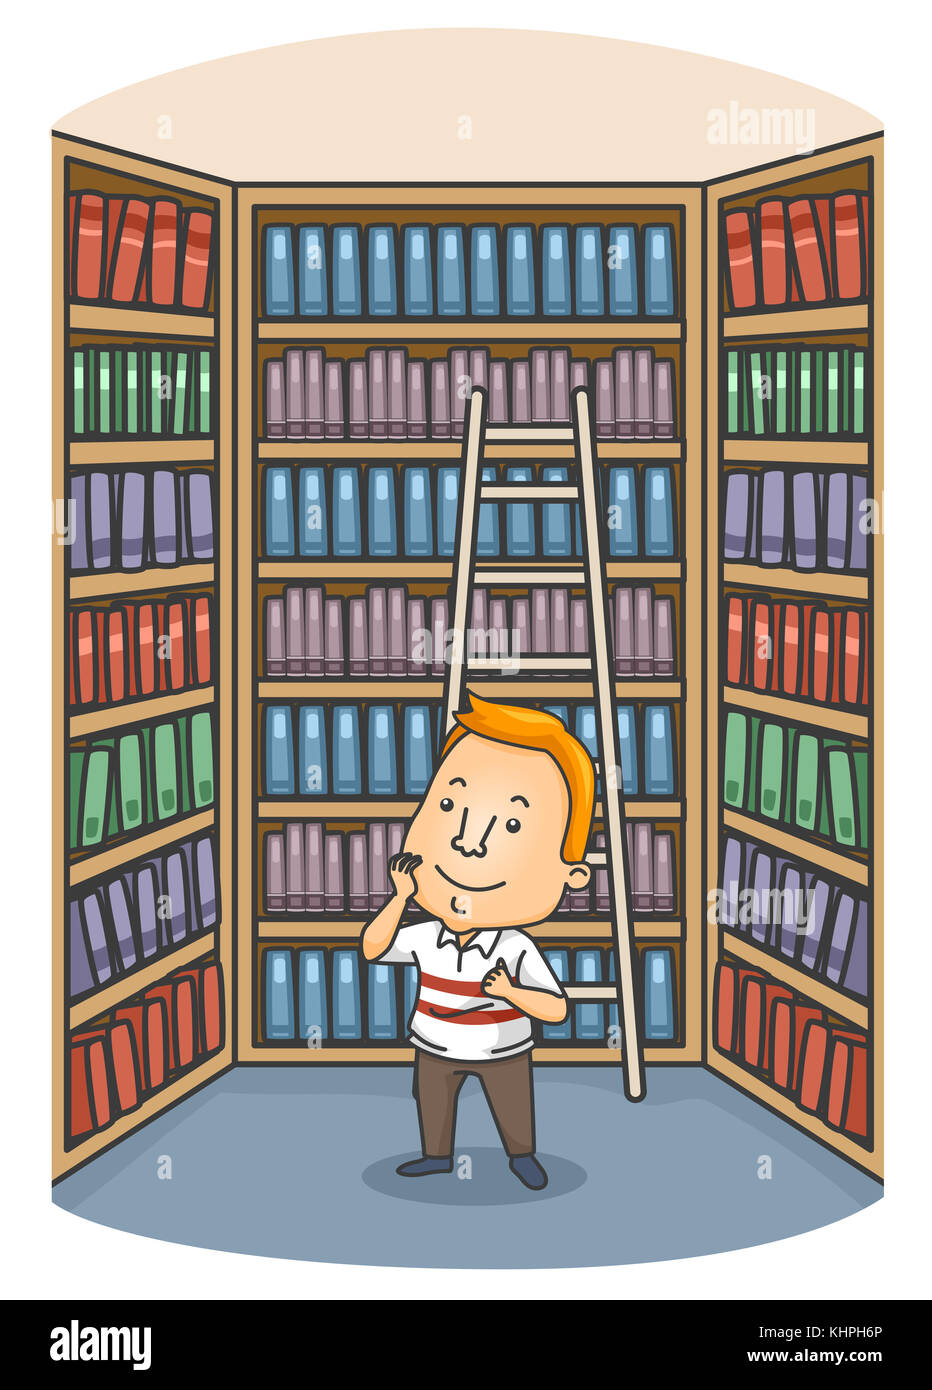 Illustration of a Man Surrounded by a Large Selection of Books Trying to Choose One to Read Stock Photo